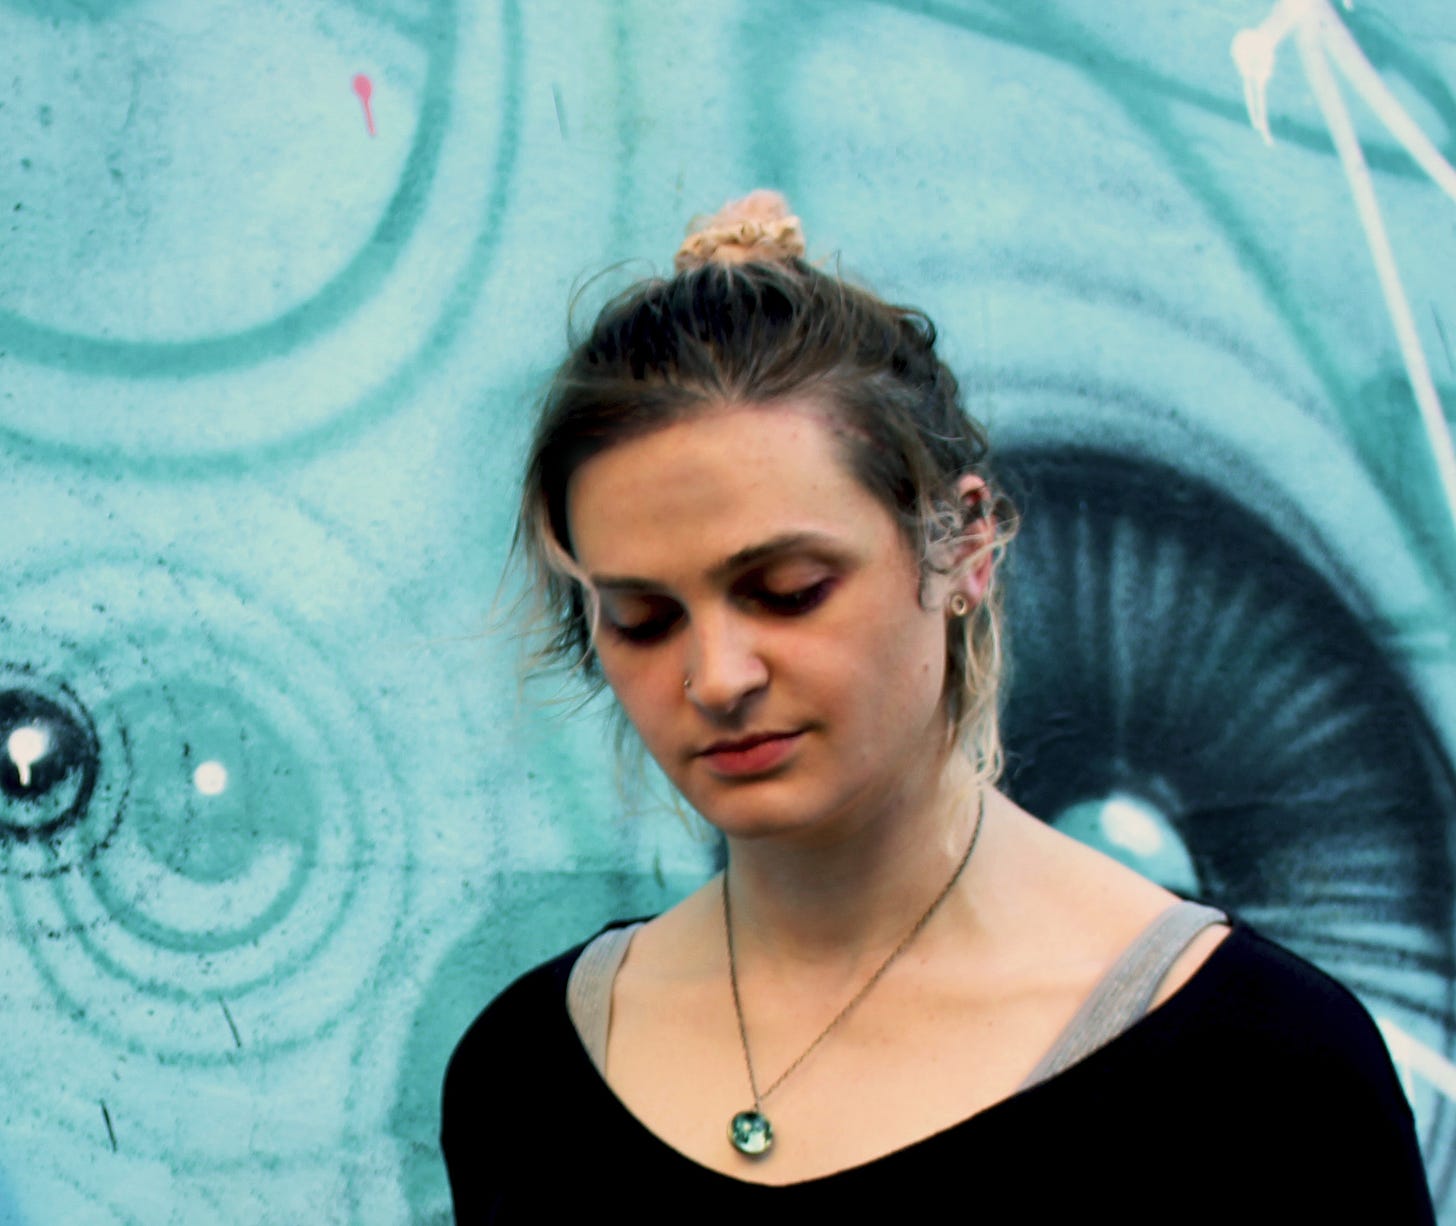 A picture of Jocelyn Burnham, a femme presenting person in her mid 30s, pictured against a creatively painted wall and wearing a black top, planet necklace and a nose stud with hair tied back in a messy bun.